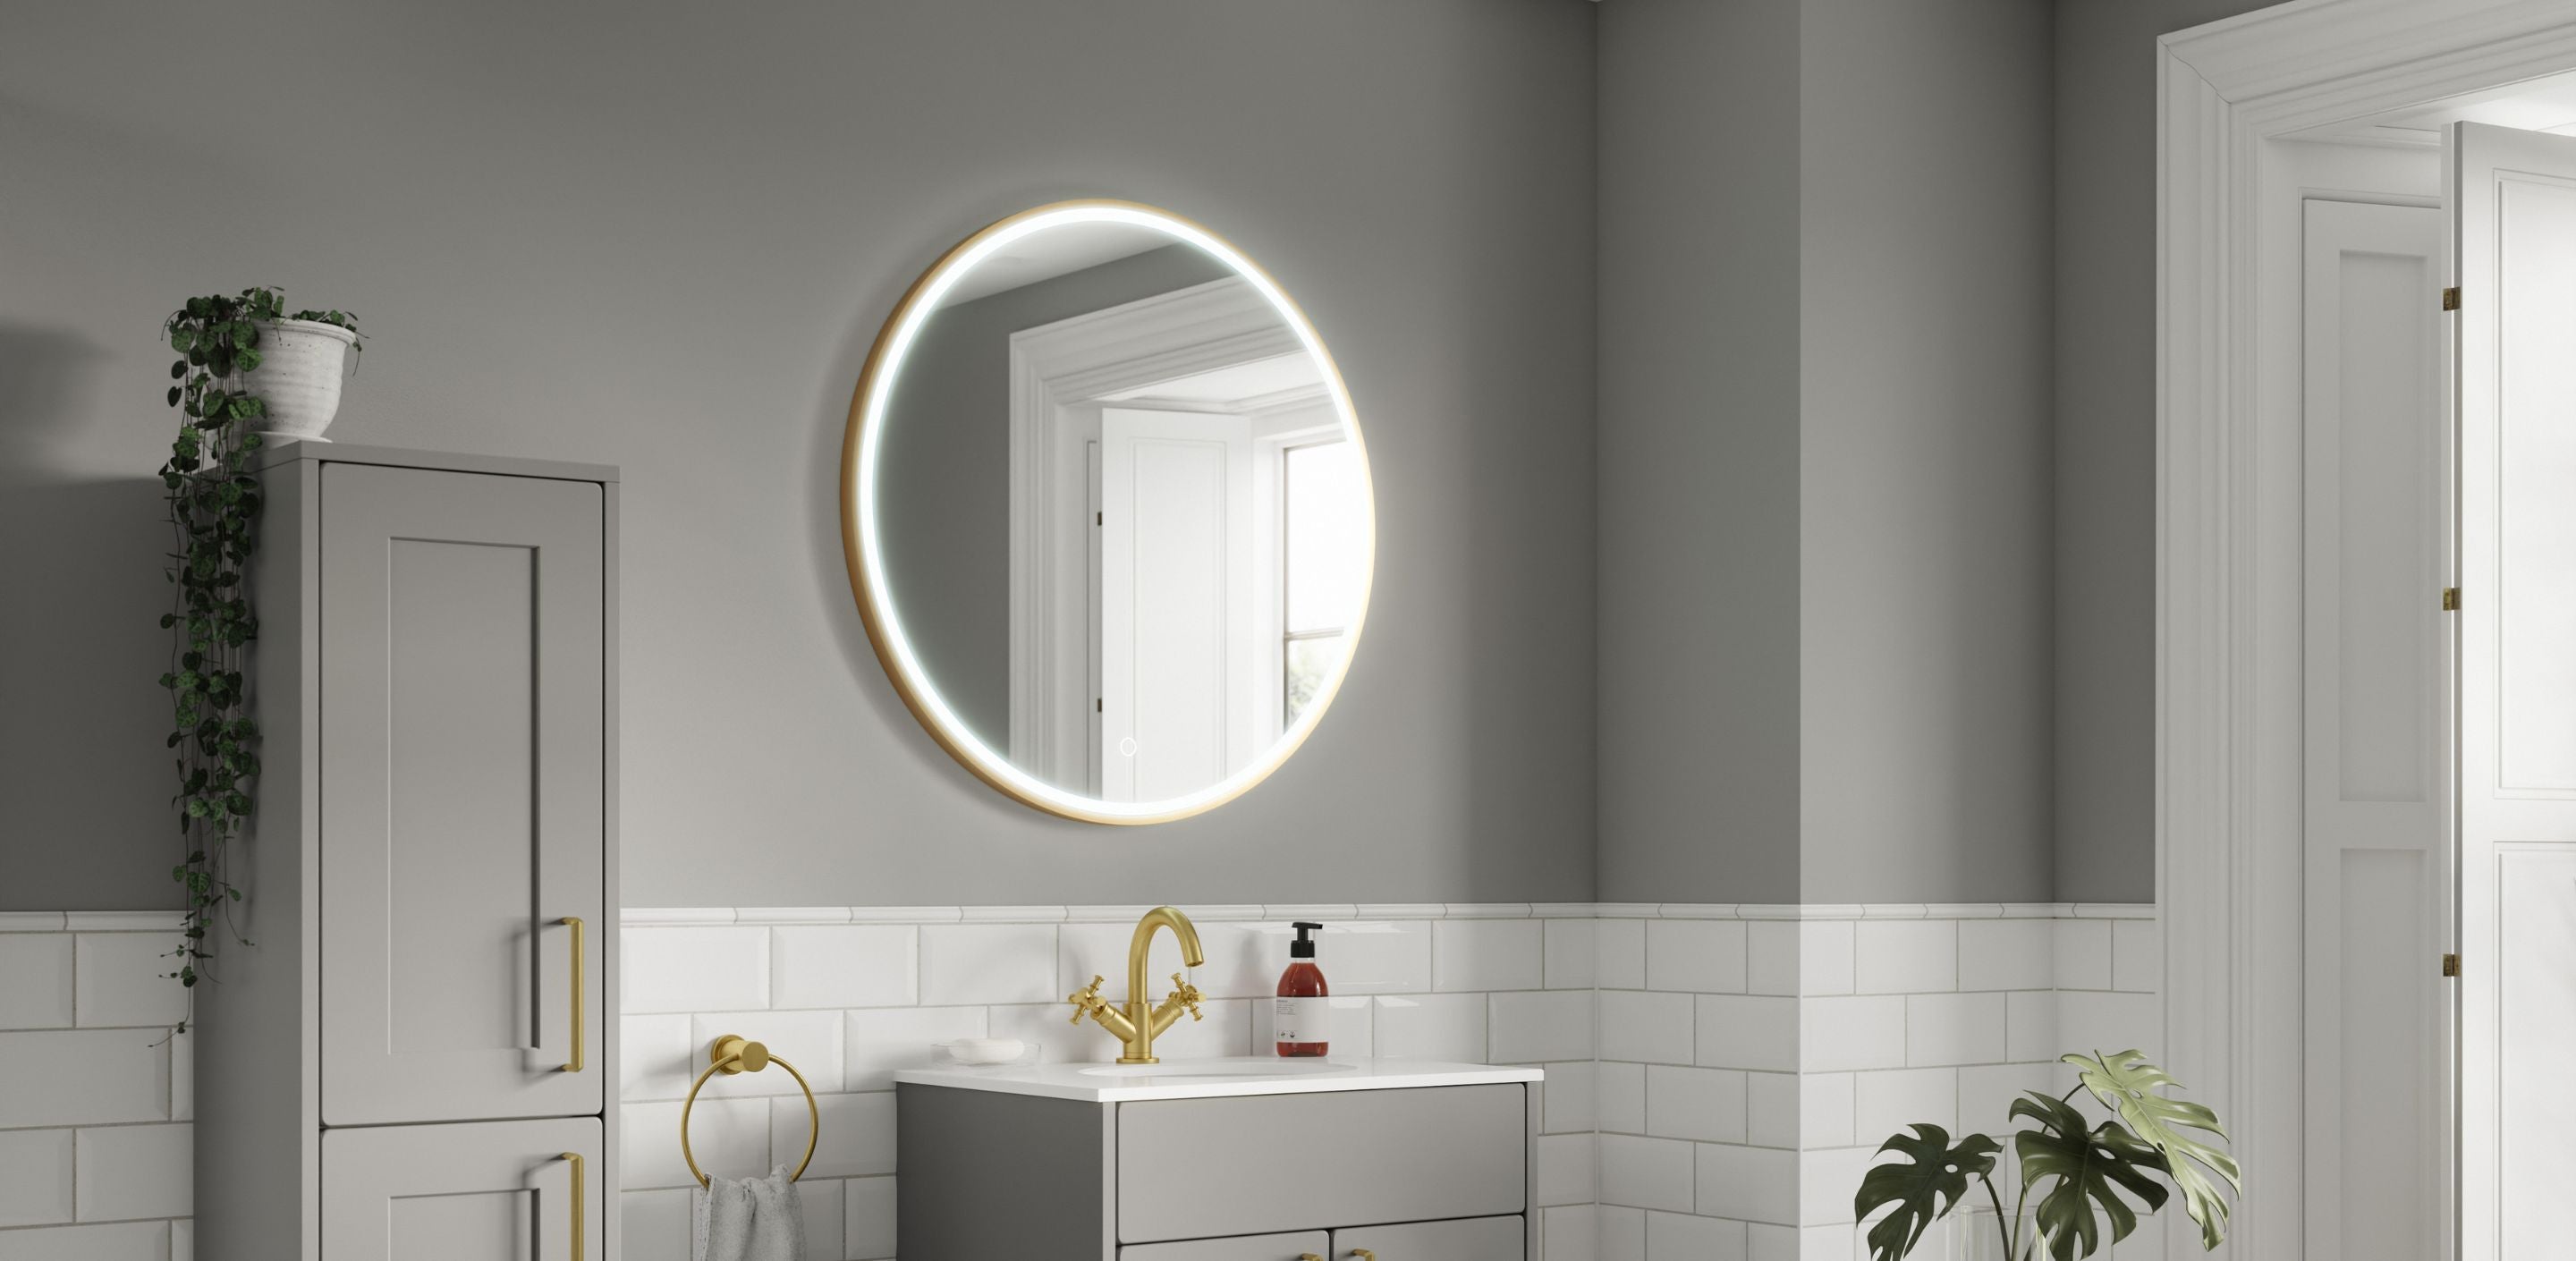 How to frame your bathroom mirror